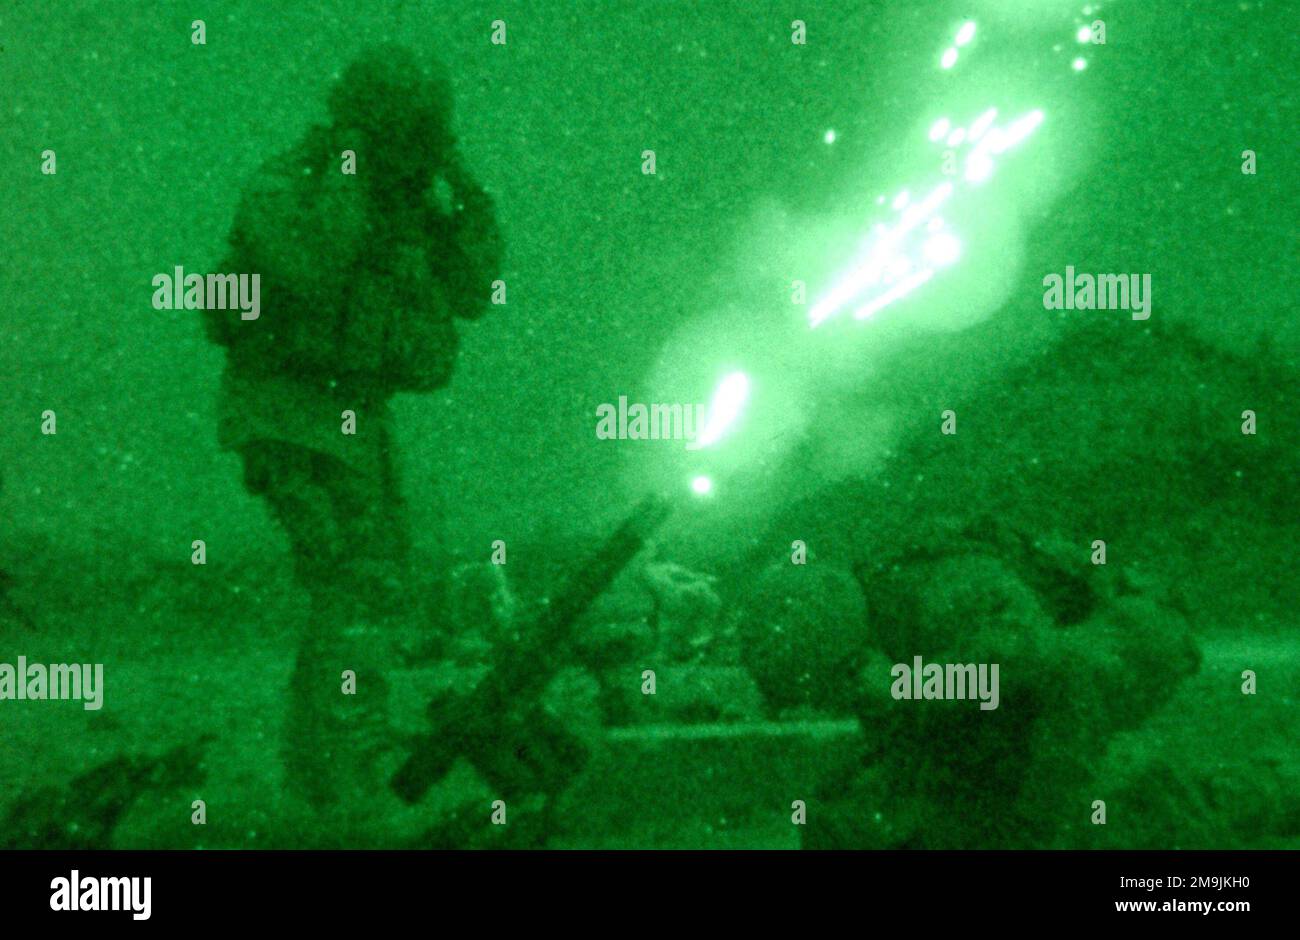 US Army (USA) Soldiers assigned to Alpha Company, 82nd Airborne Division, fire an M83A3 illumination round from their 60mm M224 lightweight company mortar, in order to get a better look at the outer perimeter of Bagram Air Base (AB), Afghanistan, during Operation ENDURING FREEDOM. Subject Operation/Series: ENDURING FREEDOM Base: Bagram Air Base State: Parwan Country: Afghanistan (AFG) Stock Photo